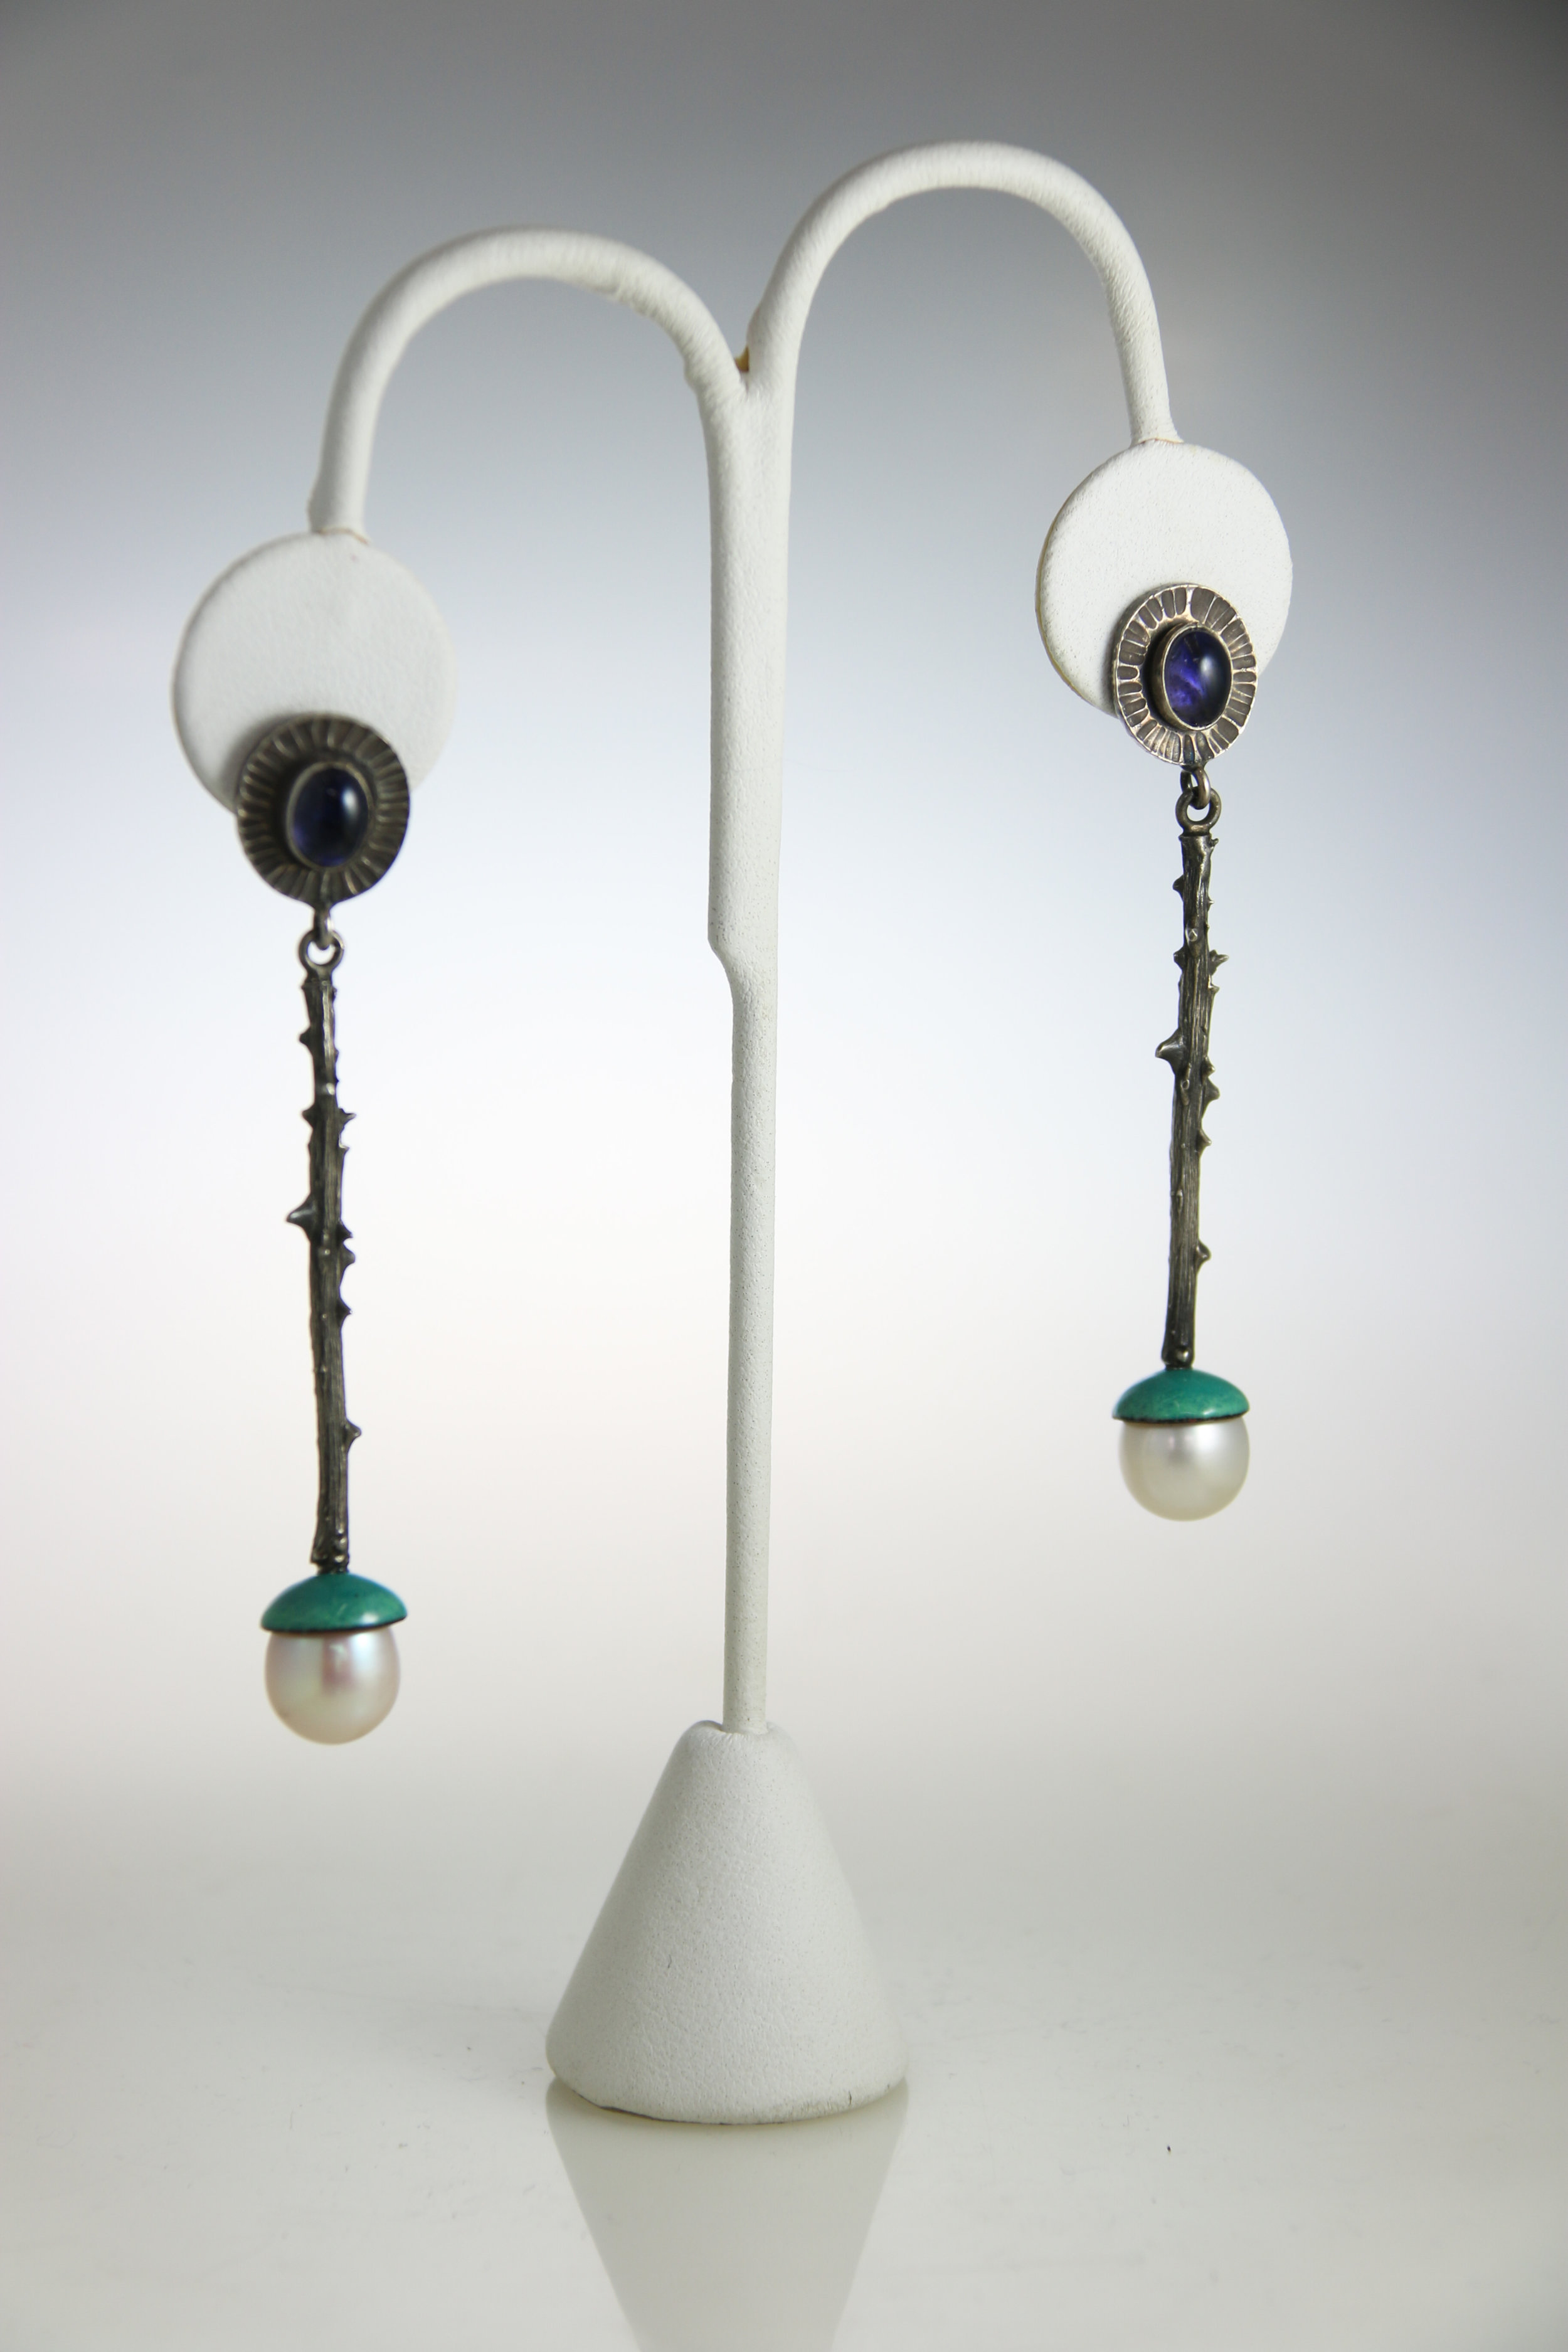   Earrings   sterling silver, pearls, enamel, gemstones  1.75” x .51” x .45”  other variations available 